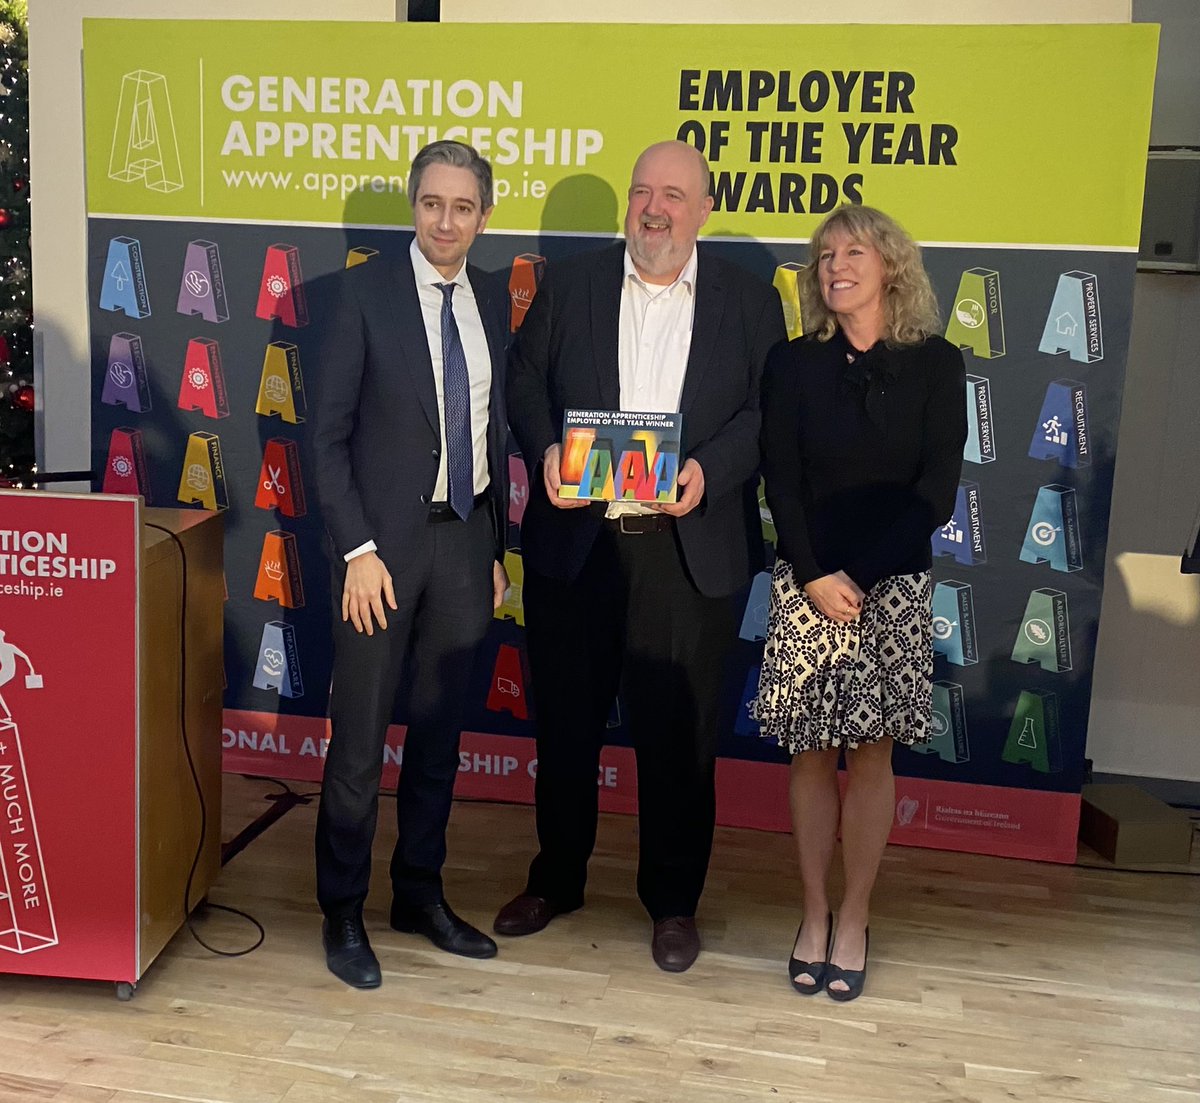 A massive congratulations to OEM Apprenticeship employers @DennisonTrailer and @dairymaster on winning awards in the Excelling diversity in the workplace category 👏🏻👏🏻Thank you @apprenticesIrl for another wonderful event. 
#generationapprenticeship #employer #awards